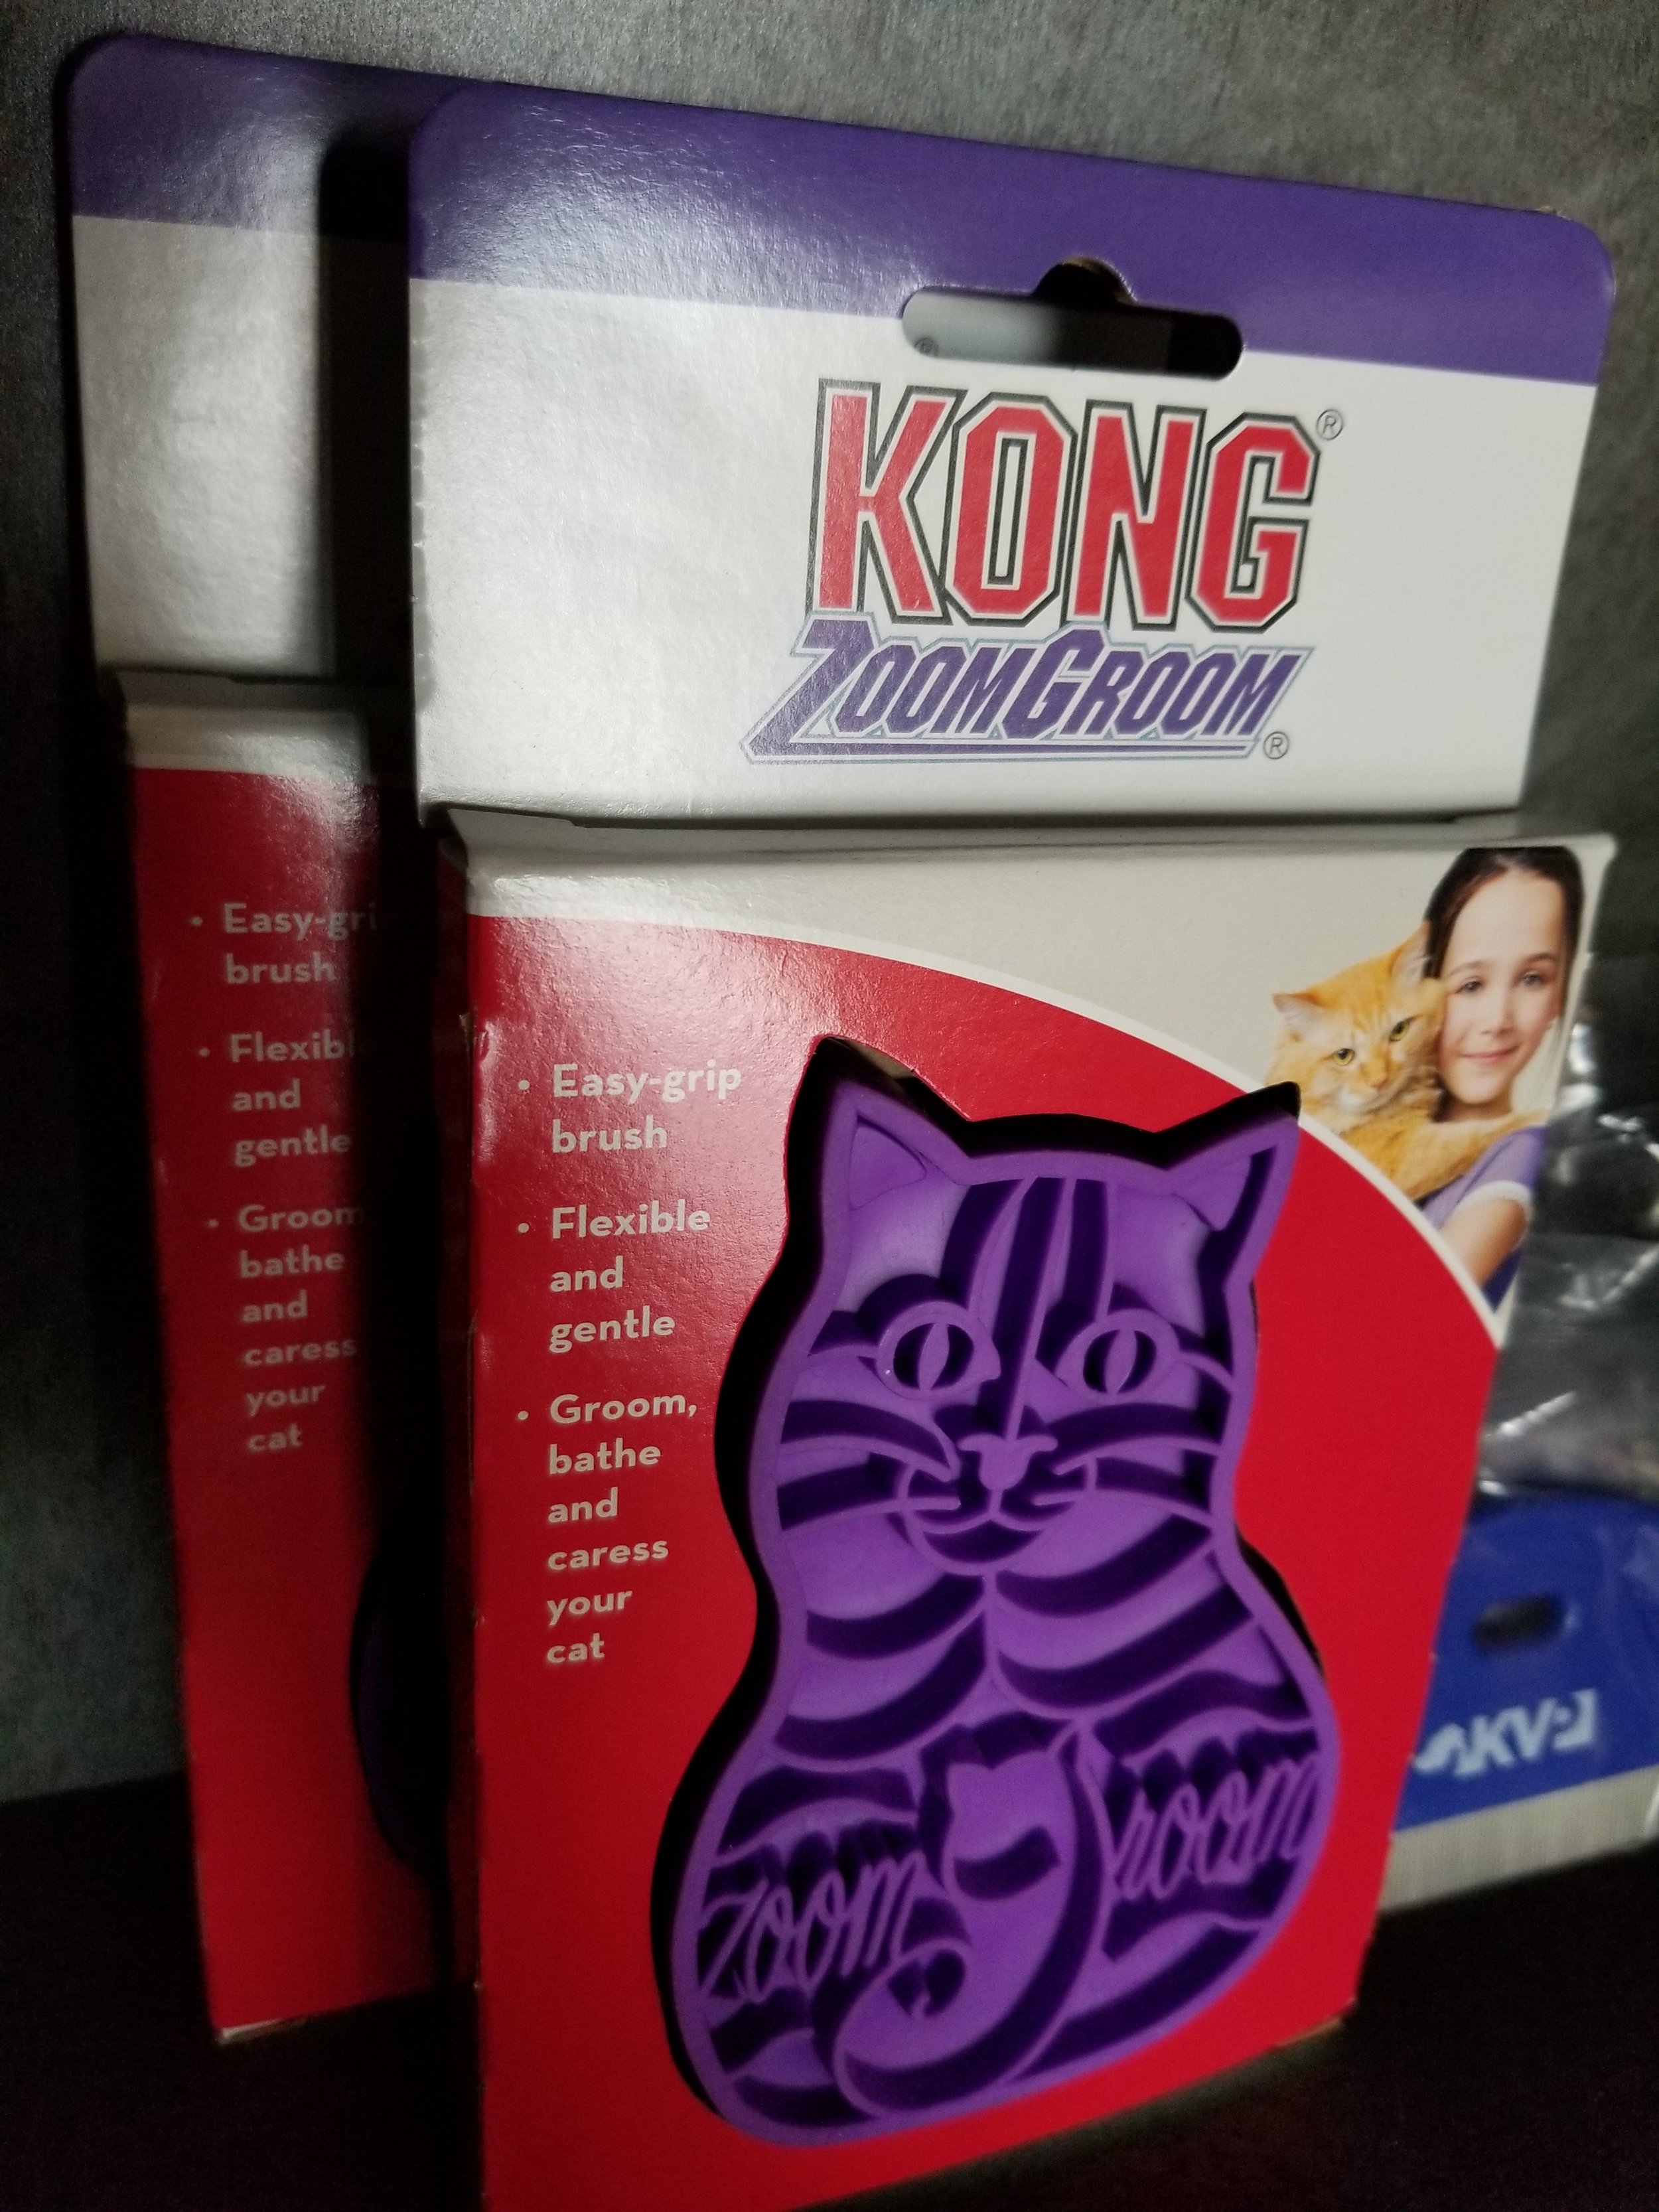 KONG ZoomGroom for Cats